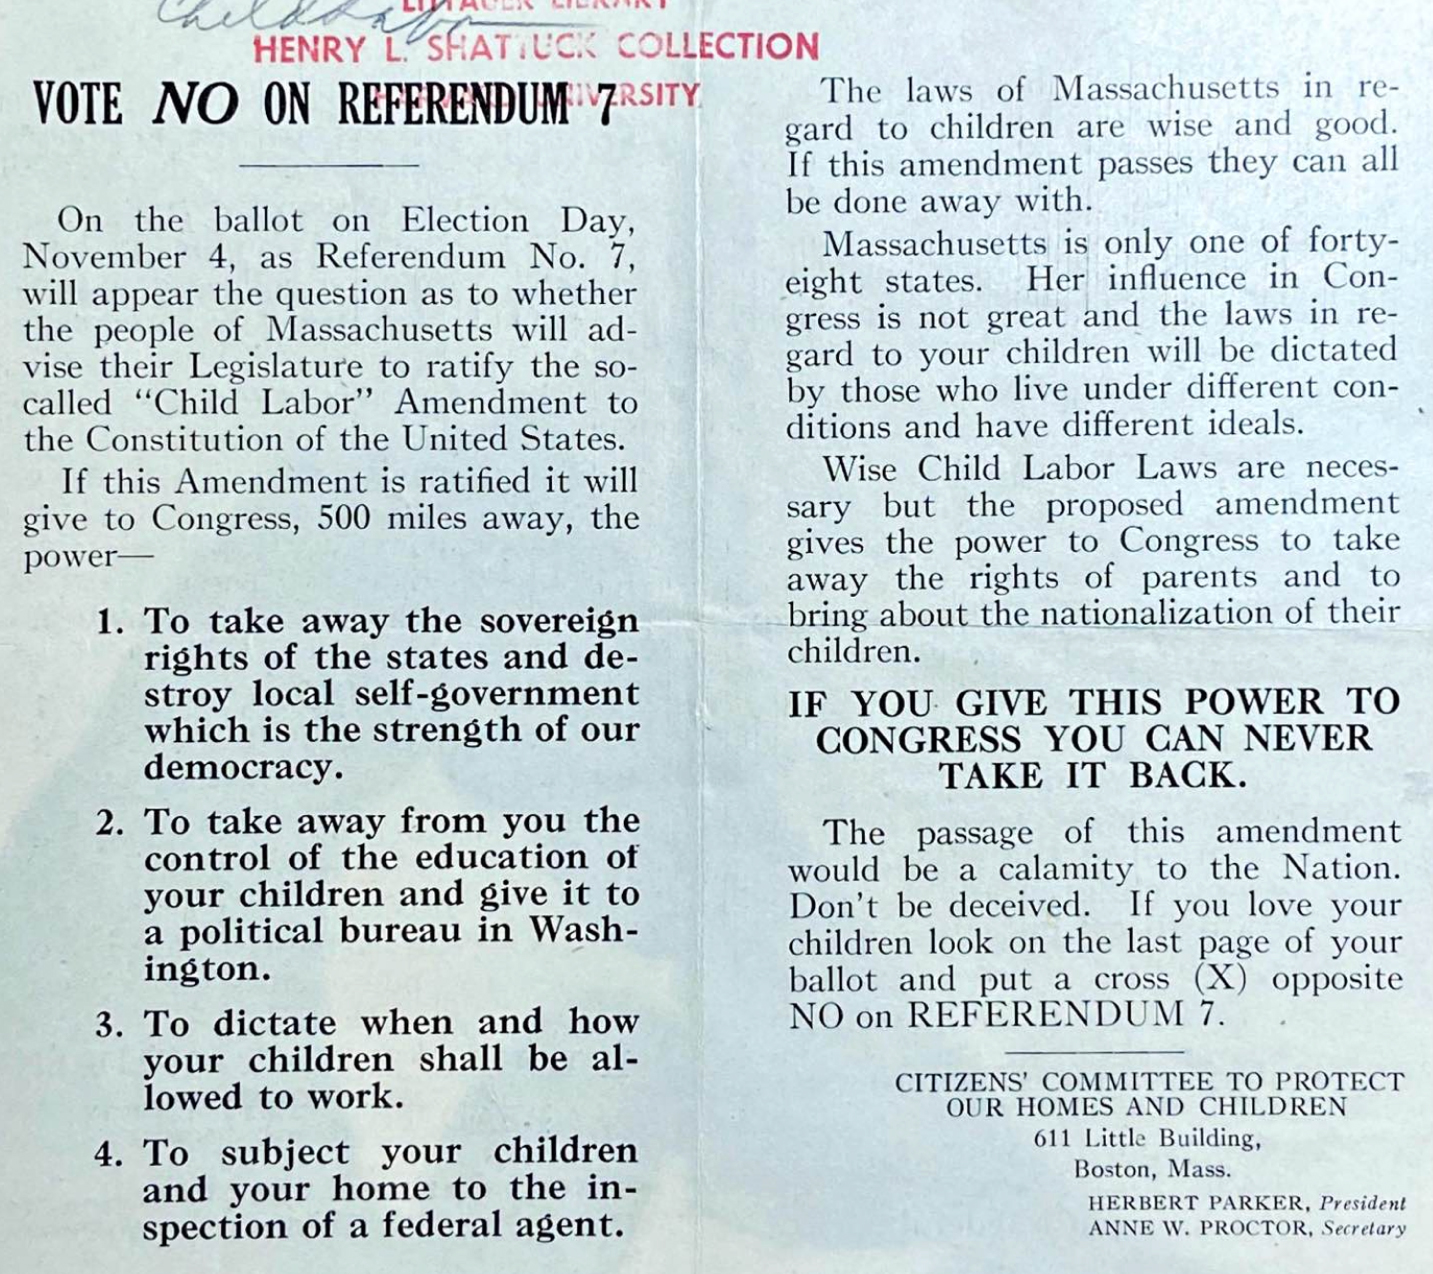 Massachusetts pamphlet opposed to the ratification of the Child Labor Amendment